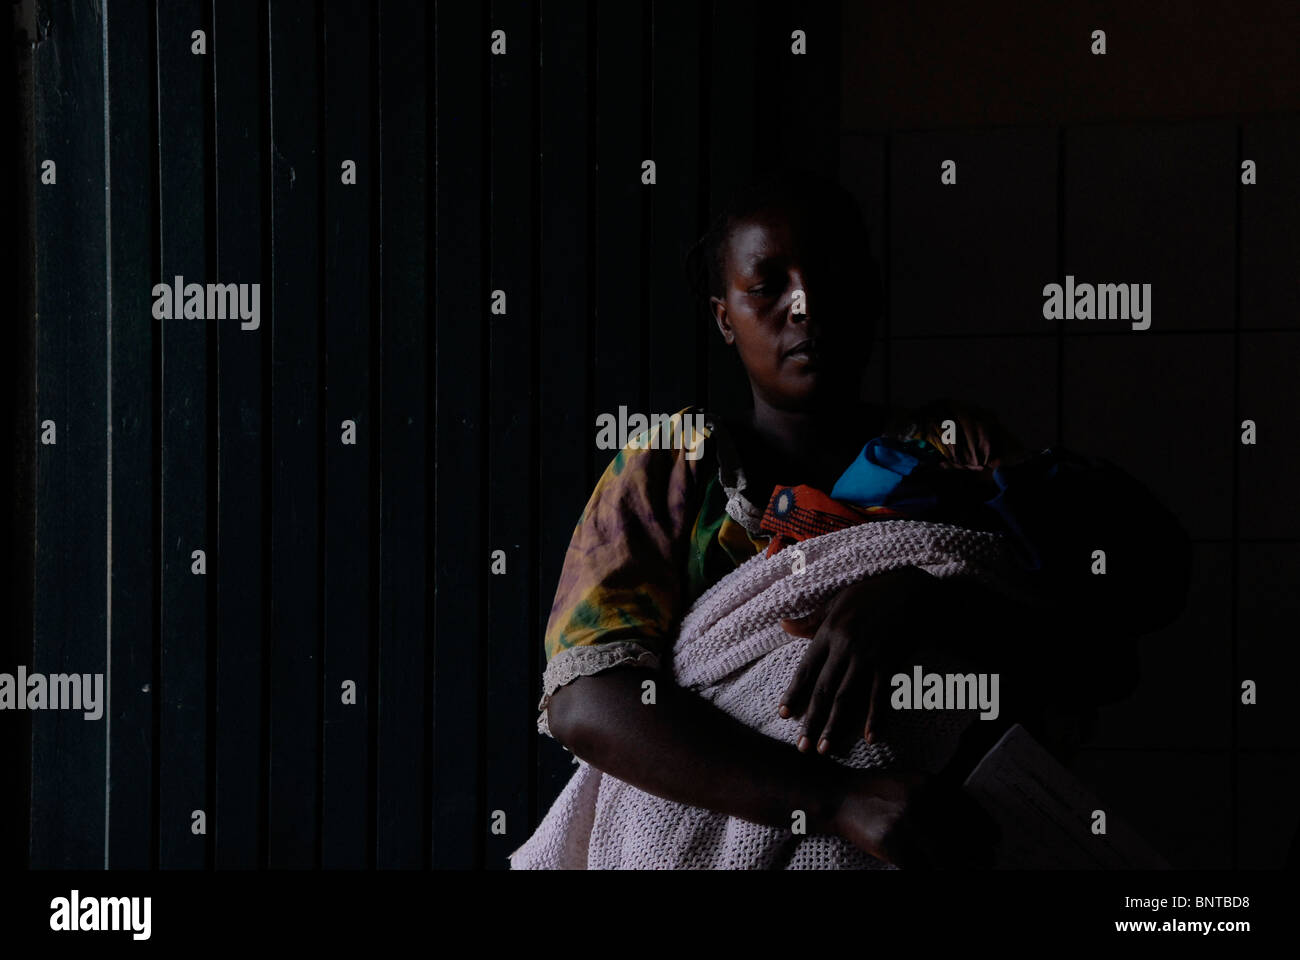 A Congolese woman with her baby waiting for medical assistance in Kiganga medical center. North Kivu province, DR Congo Africa Stock Photo